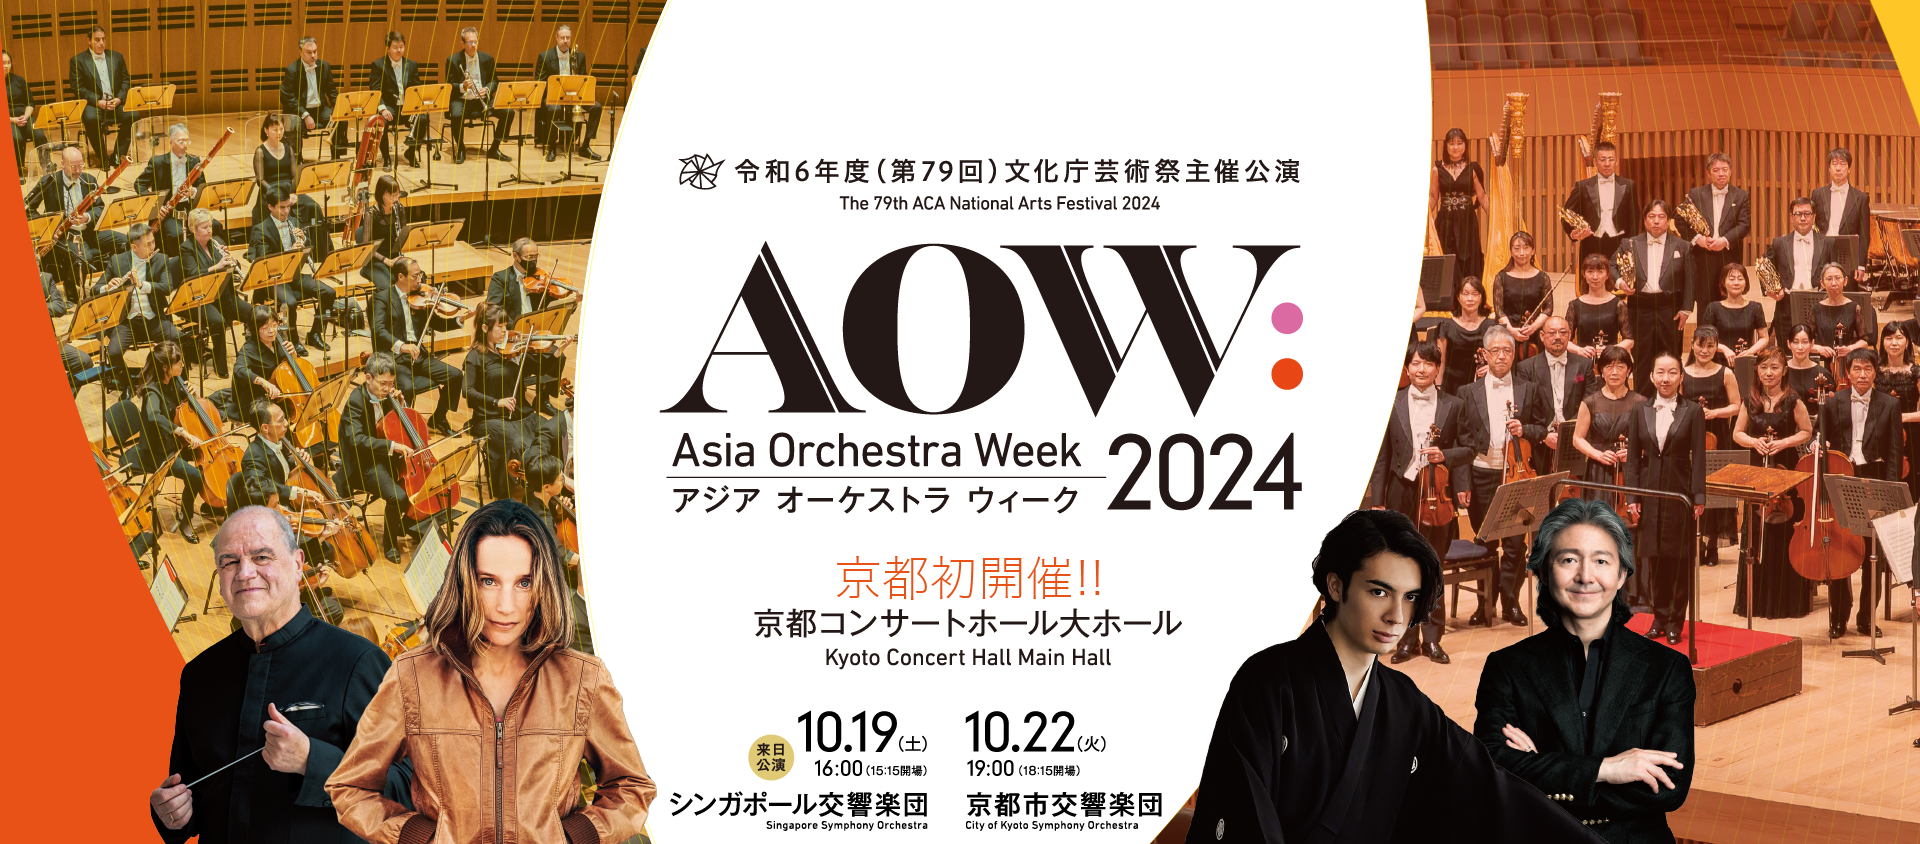 Asia Orchestra Week 2024